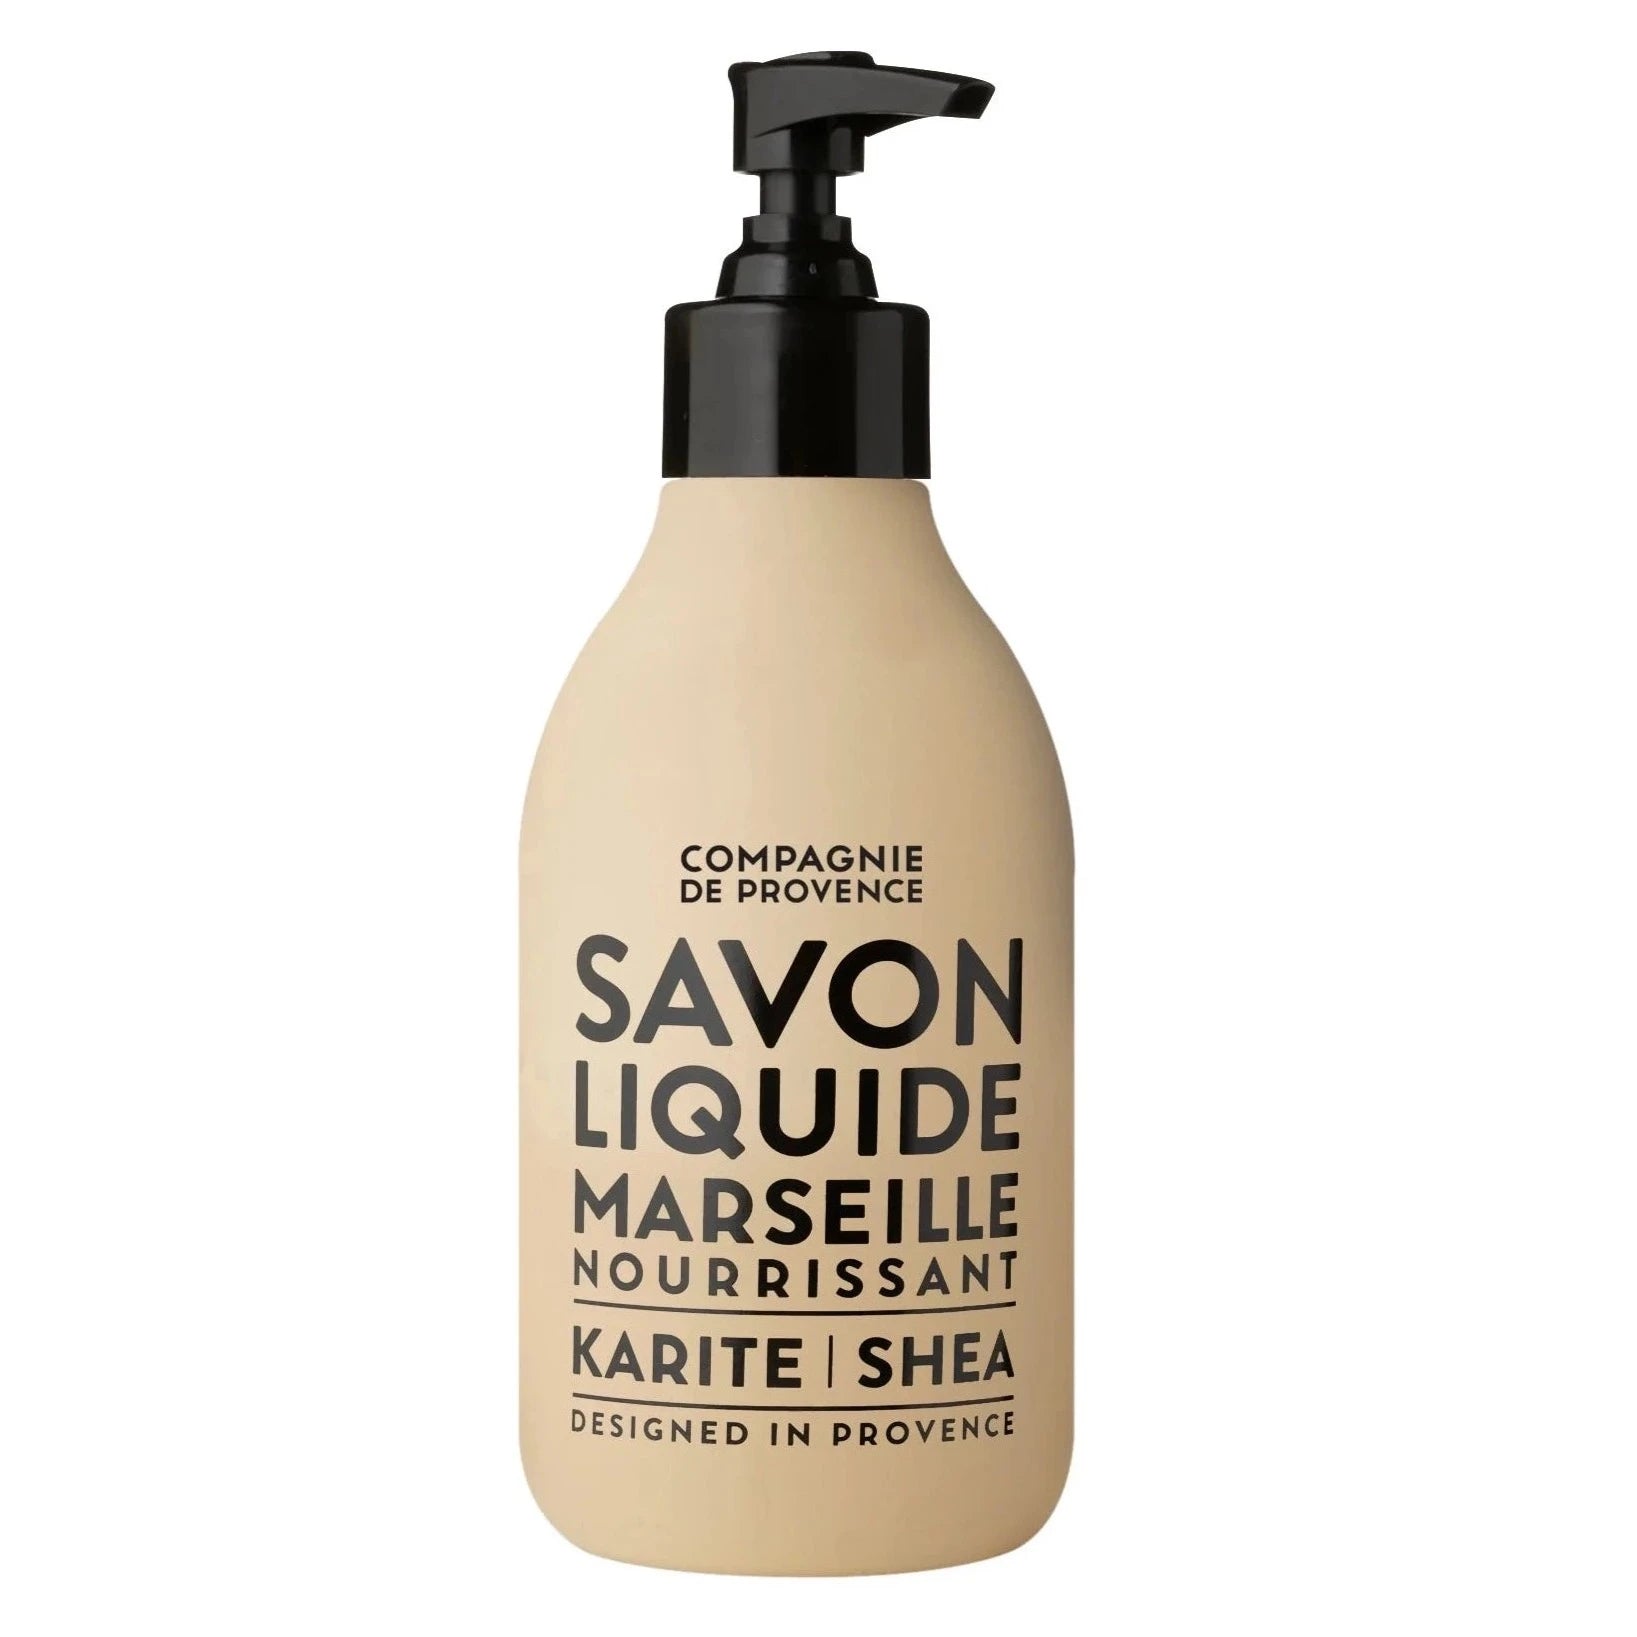 beige soap bottle with black text and black pump 